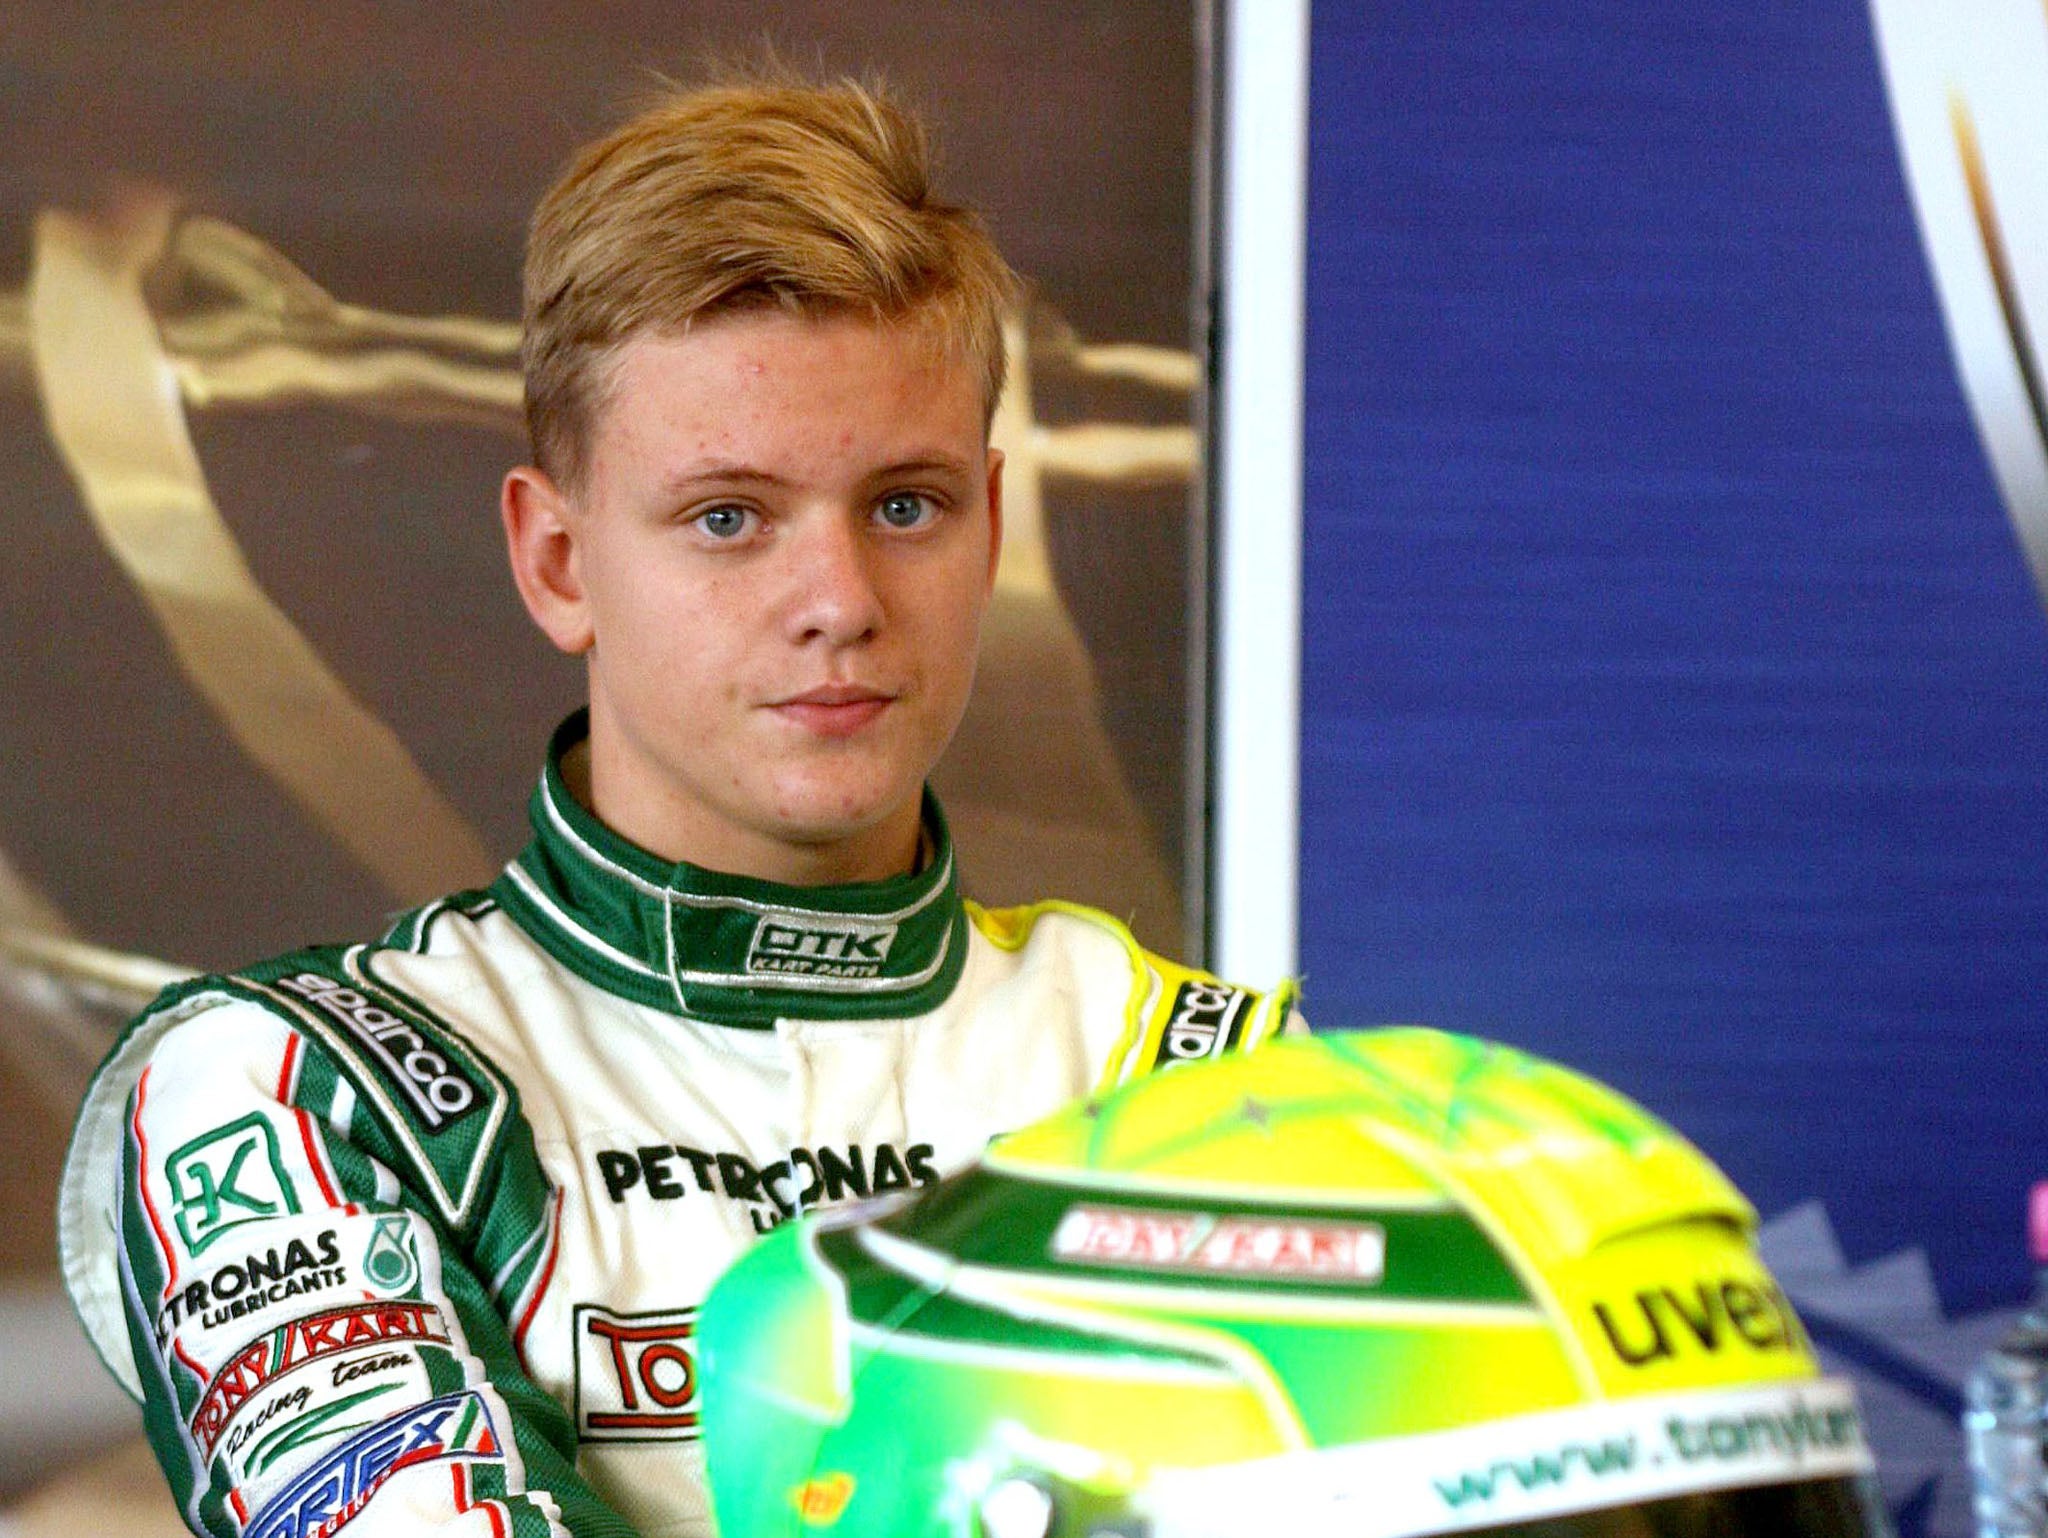 Mick Schumacher, the 15-year-old racing protégé and son of Michael Schumacher, at the karting world championships in September 2014